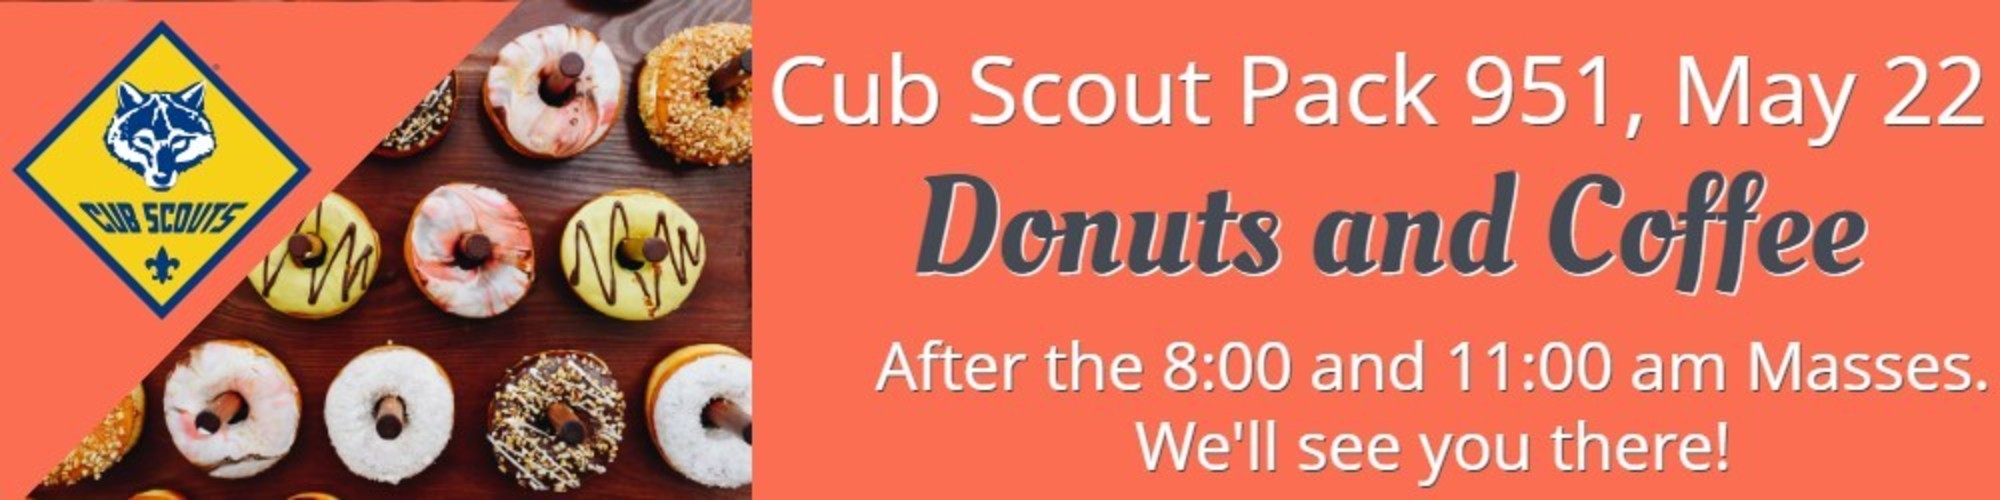 Cub Scout Donuts And Coffee May 22